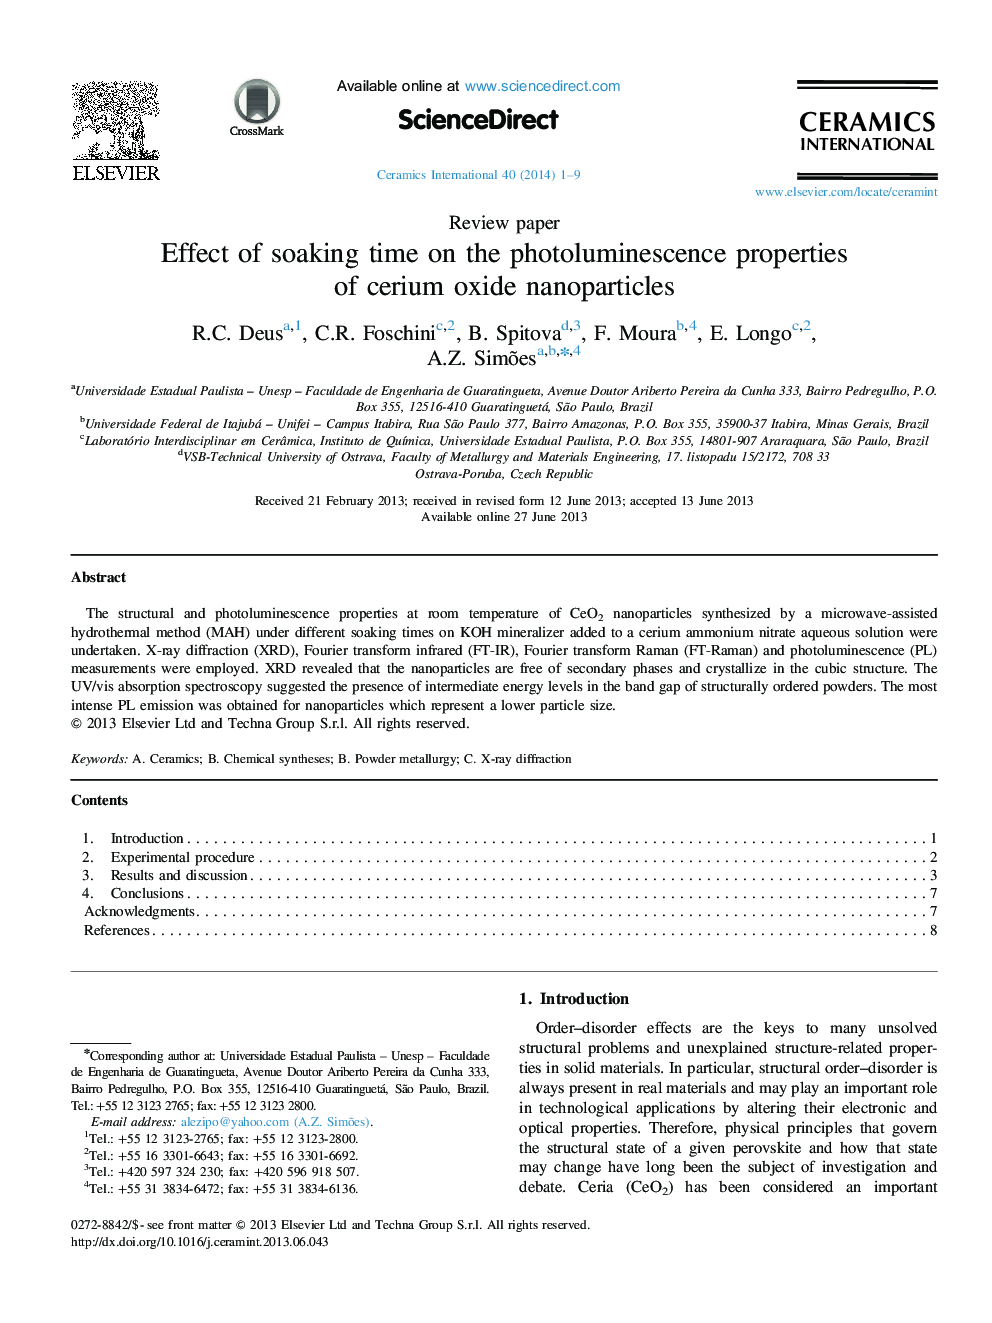 Effect of soaking time on the photoluminescence properties of cerium oxide nanoparticles